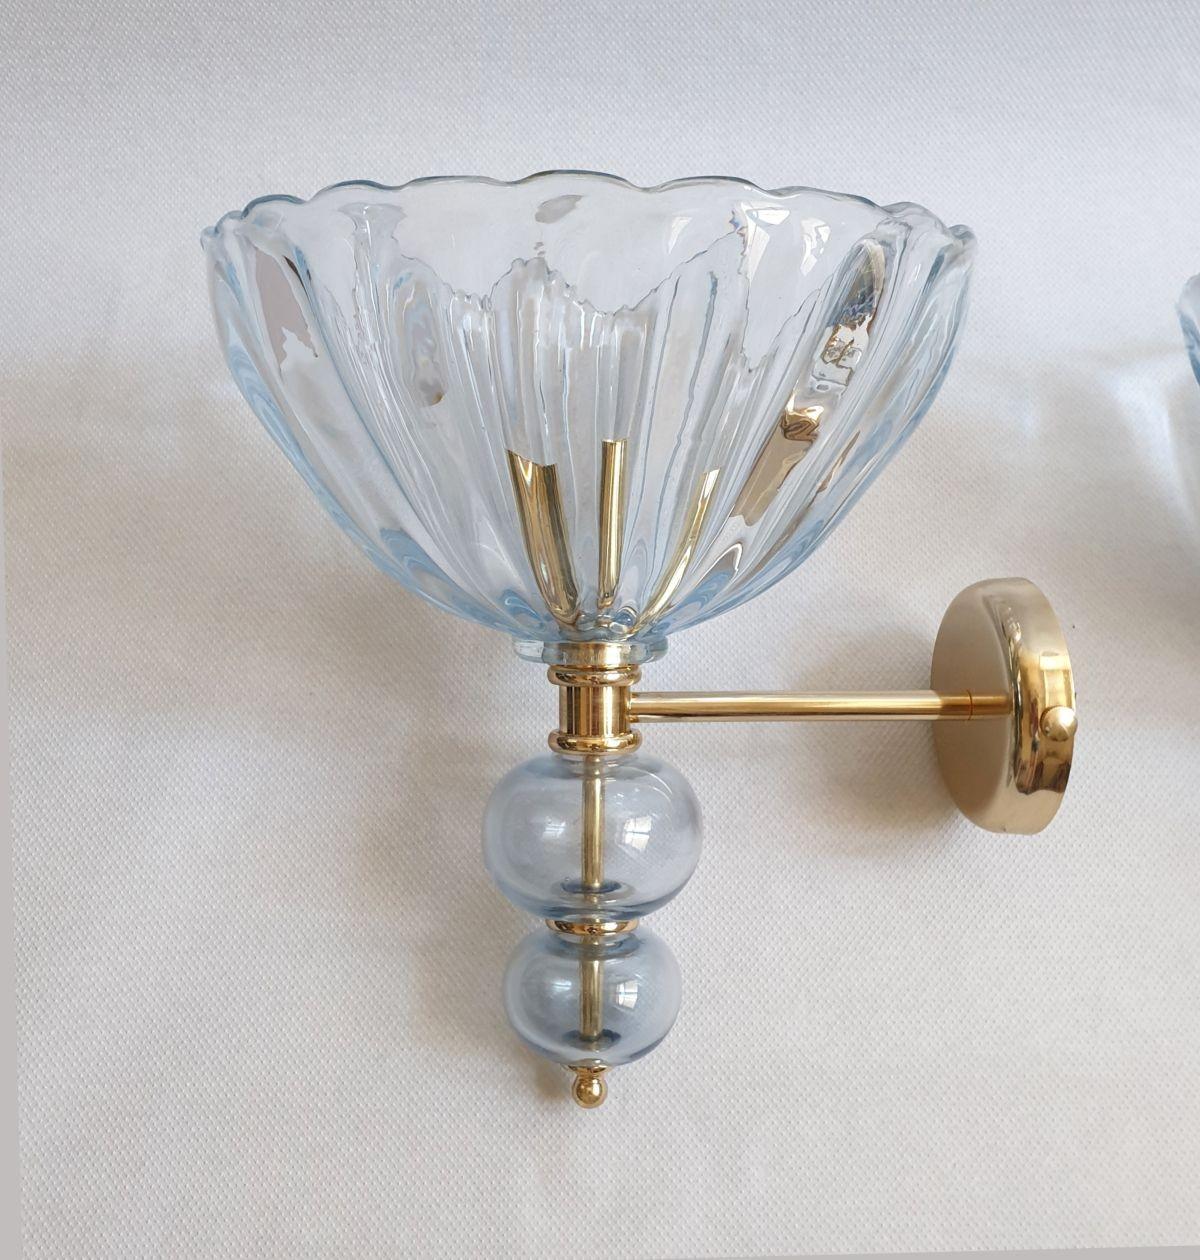 Pair of large handblown Murano glass wall sconces, Mid-Century Modern, attributed to Barovier & Toso, Italy 1970s.
The sconces are made of a very light blue thick Murano glass and polished brass mounts.
The vintage sconces have 1 light each and